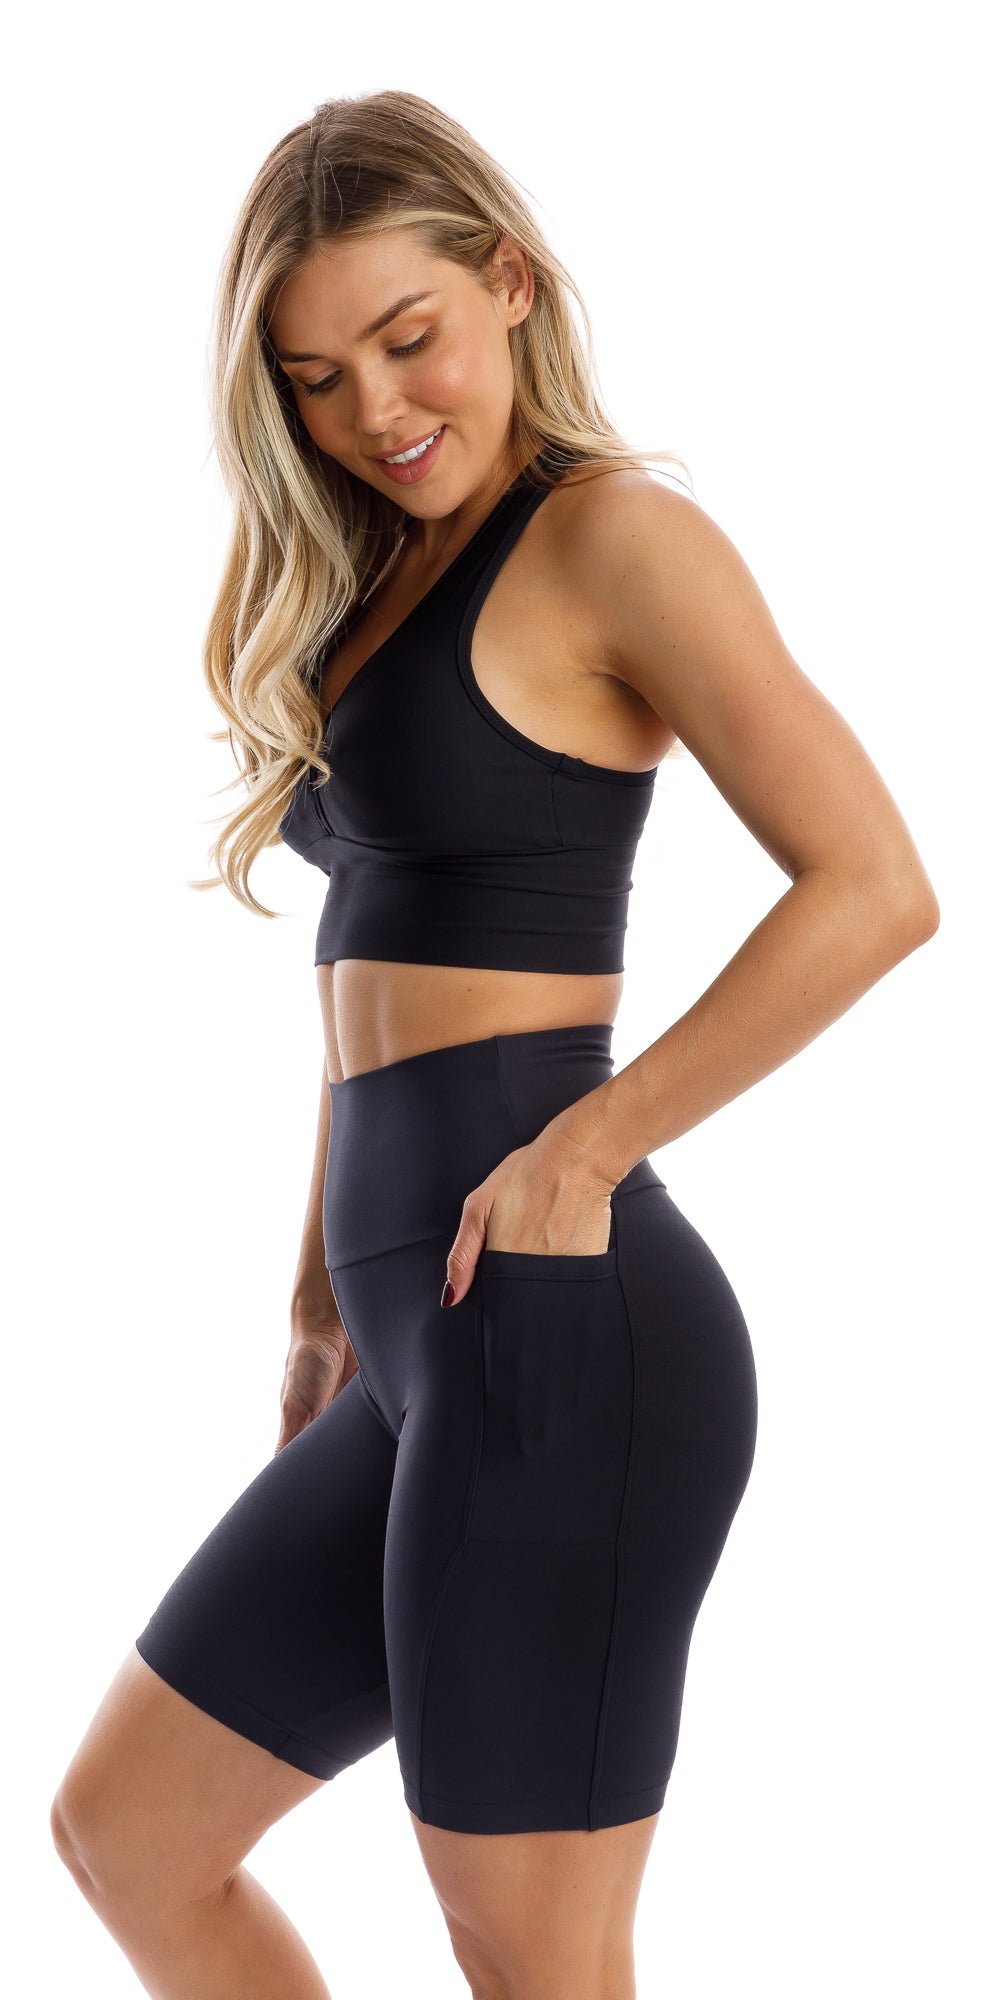 Full body side view of girl in black Midnight Eco Biker Shorts with Pockets and matching bra putting one hand in the pocket